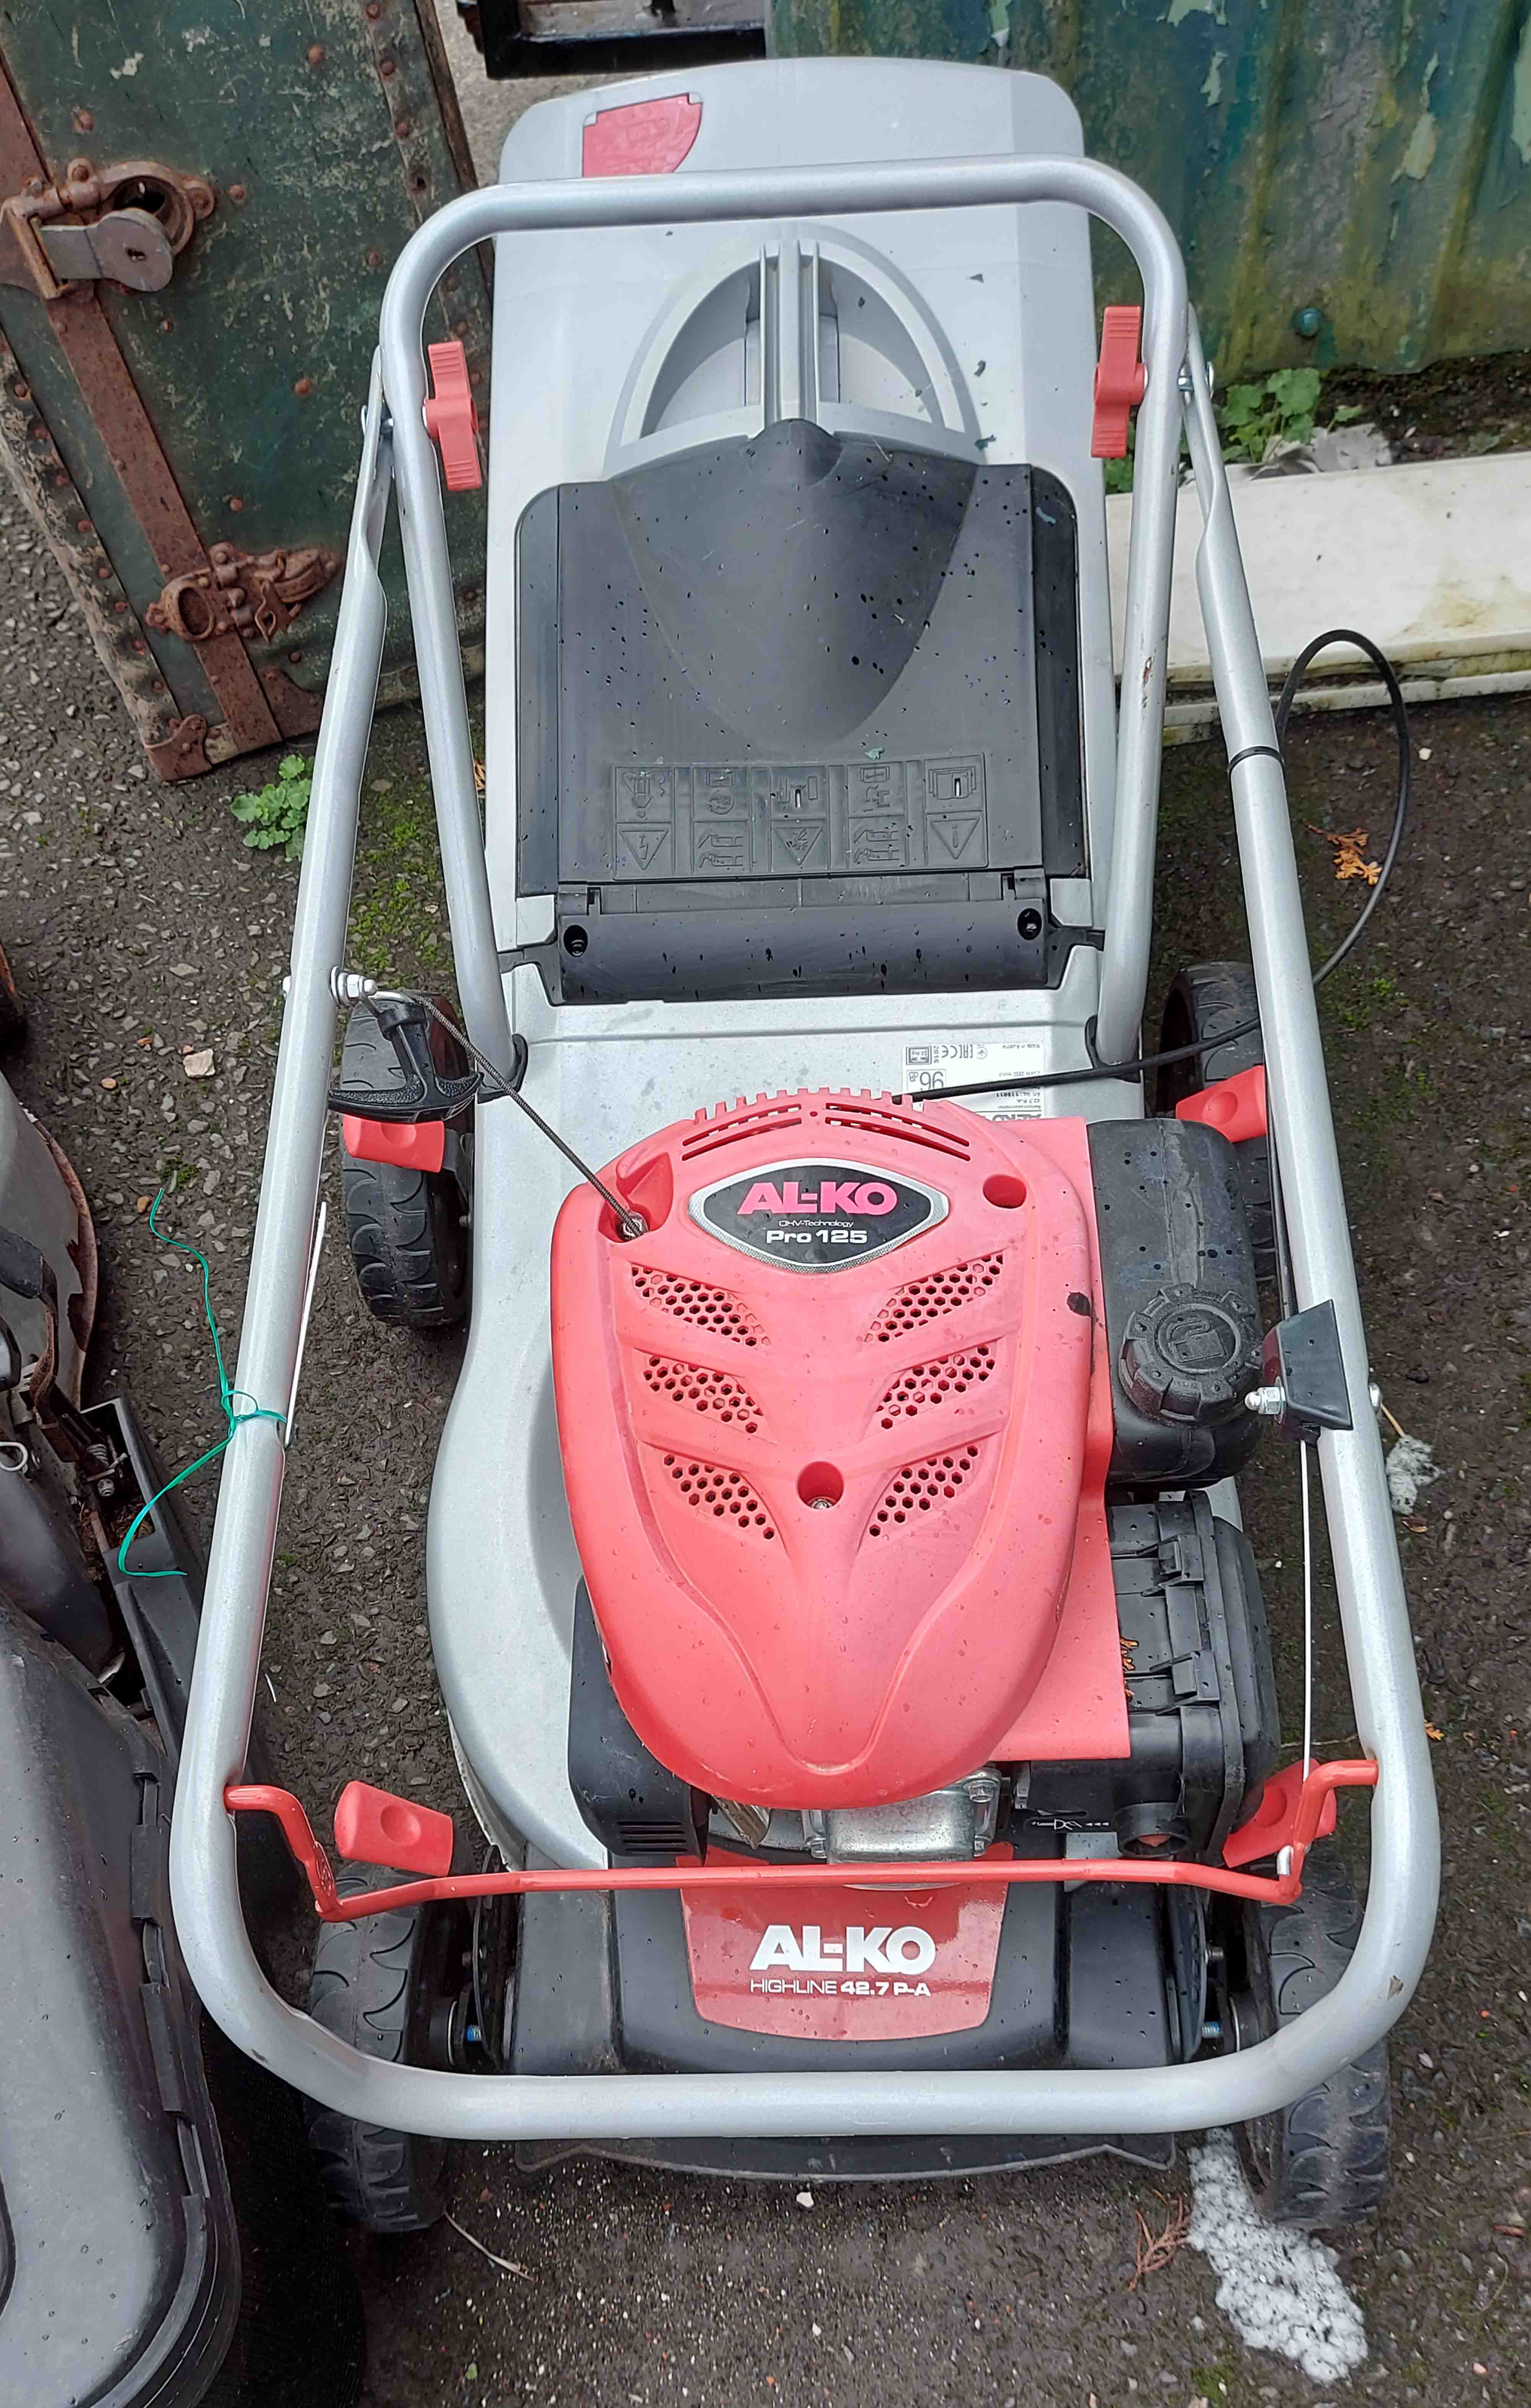 An Al-Ko Highline 42.7 P-A petrol lawn mower with 'Pro 125' OHV 4 stroke engine and grass box